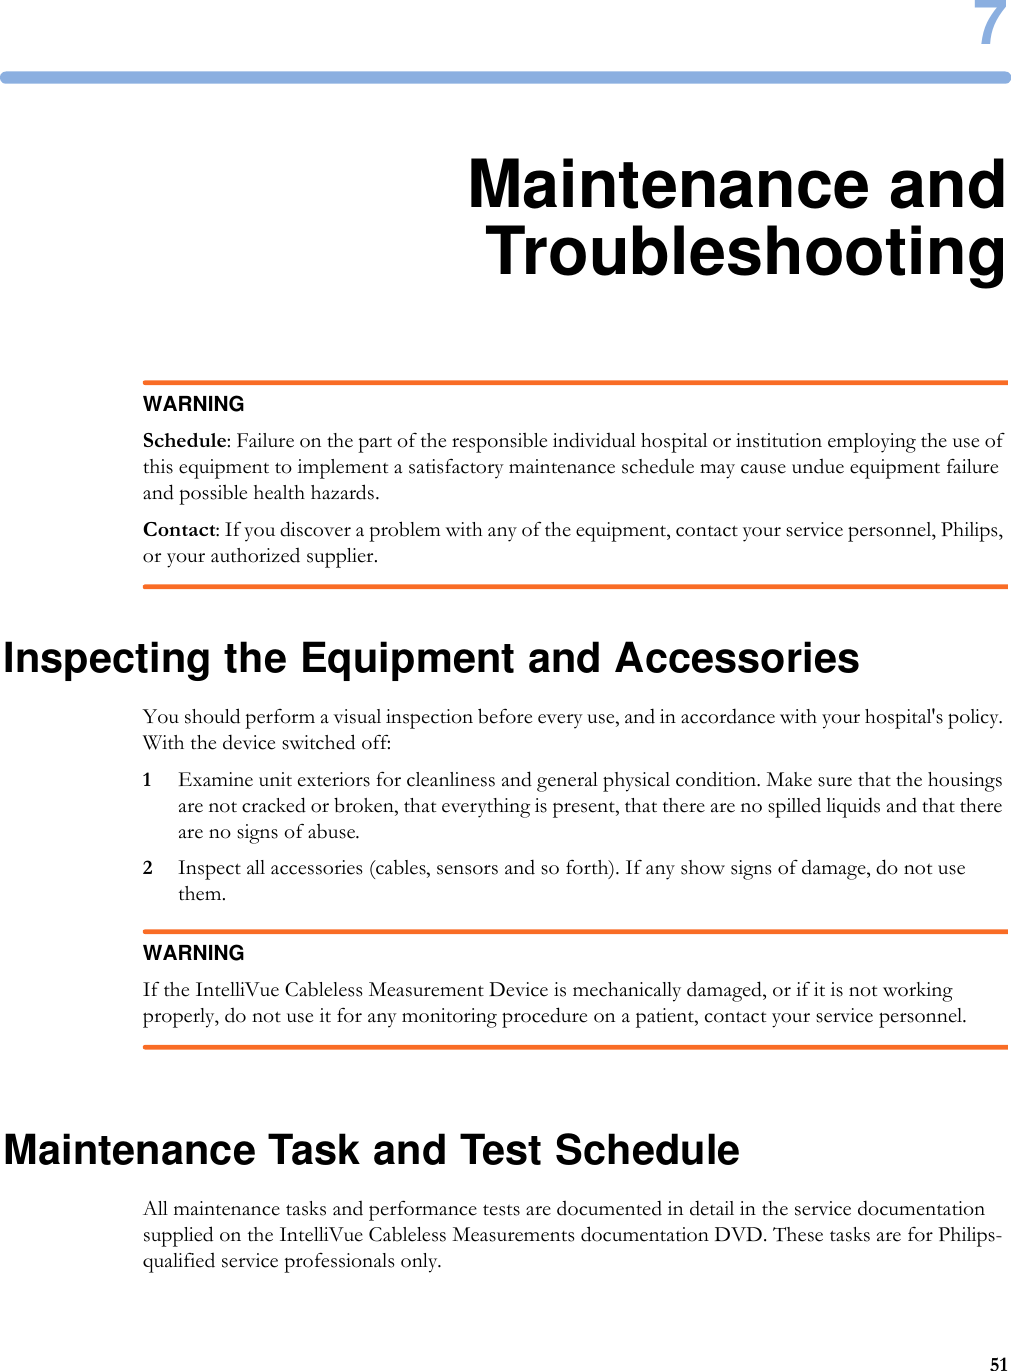 7517Maintenance andTroubleshootingWARNINGSchedule: Failure on the part of the responsible individual hospital or institution employing the use of this equipment to implement a satisfactory maintenance schedule may cause undue equipment failure and possible health hazards.Contact: If you discover a problem with any of the equipment, contact your service personnel, Philips, or your authorized supplier.Inspecting the Equipment and AccessoriesYou should perform a visual inspection before every use, and in accordance with your hospital&apos;s policy. With the device switched off:1Examine unit exteriors for cleanliness and general physical condition. Make sure that the housings are not cracked or broken, that everything is present, that there are no spilled liquids and that there are no signs of abuse.2Inspect all accessories (cables, sensors and so forth). If any show signs of damage, do not use them.WARNINGIf the IntelliVue Cableless Measurement Device is mechanically damaged, or if it is not working properly, do not use it for any monitoring procedure on a patient, contact your service personnel.Maintenance Task and Test ScheduleAll maintenance tasks and performance tests are documented in detail in the service documentation supplied on the IntelliVue Cableless Measurements documentation DVD. These tasks are for Philips-qualified service professionals only.